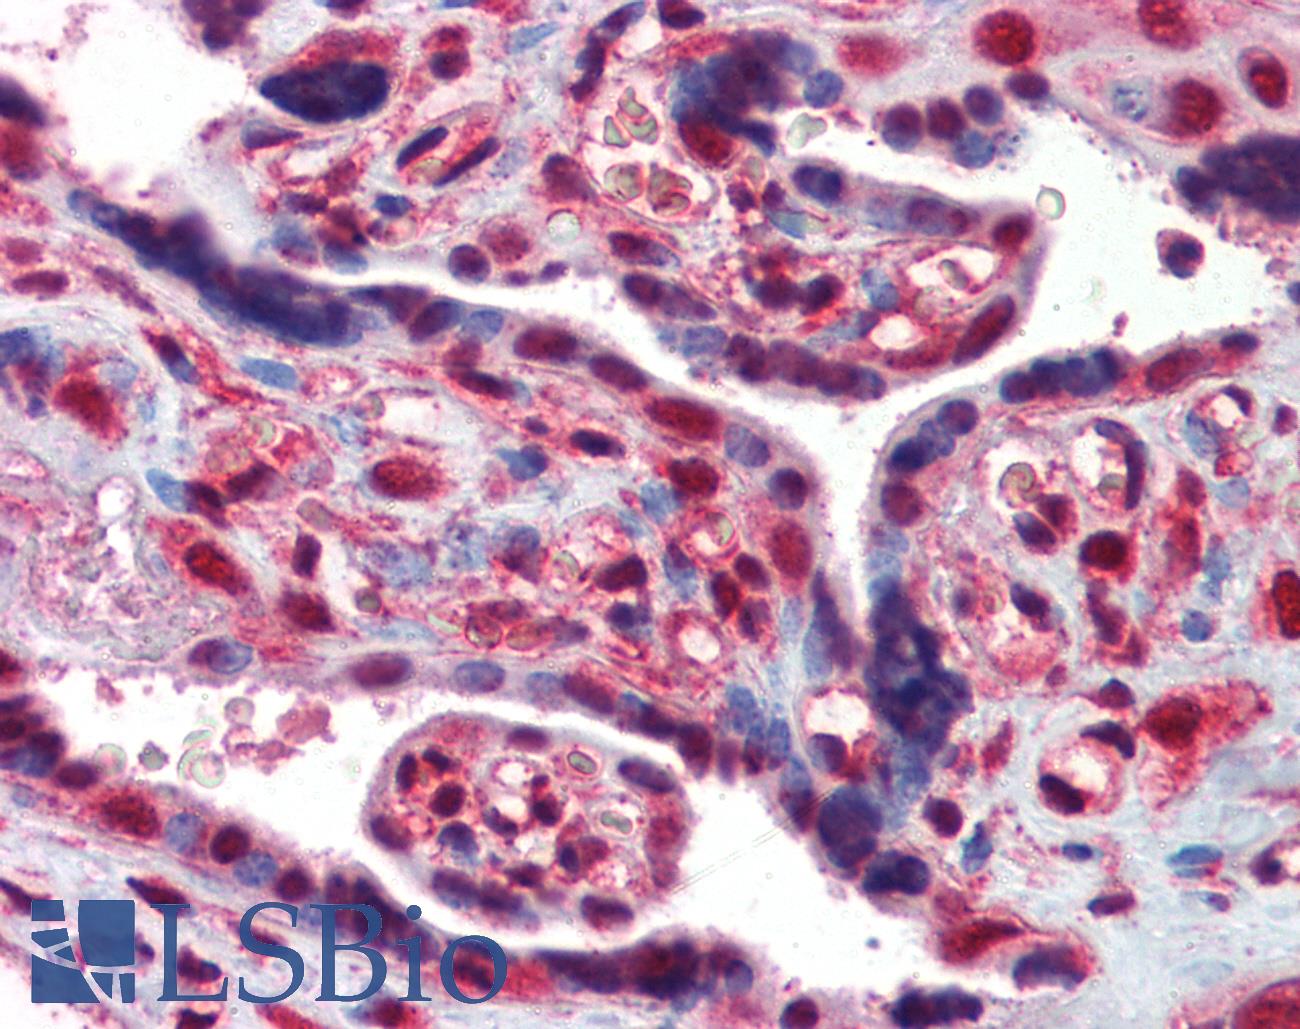 EIF4EBP1 / 4EBP1 Antibody - Anti-EIF4EBP1 / 4EBP1 antibody IHC of human placenta. Immunohistochemistry of formalin-fixed, paraffin-embedded tissue after heat-induced antigen retrieval. Antibody concentration 5 ug/ml.